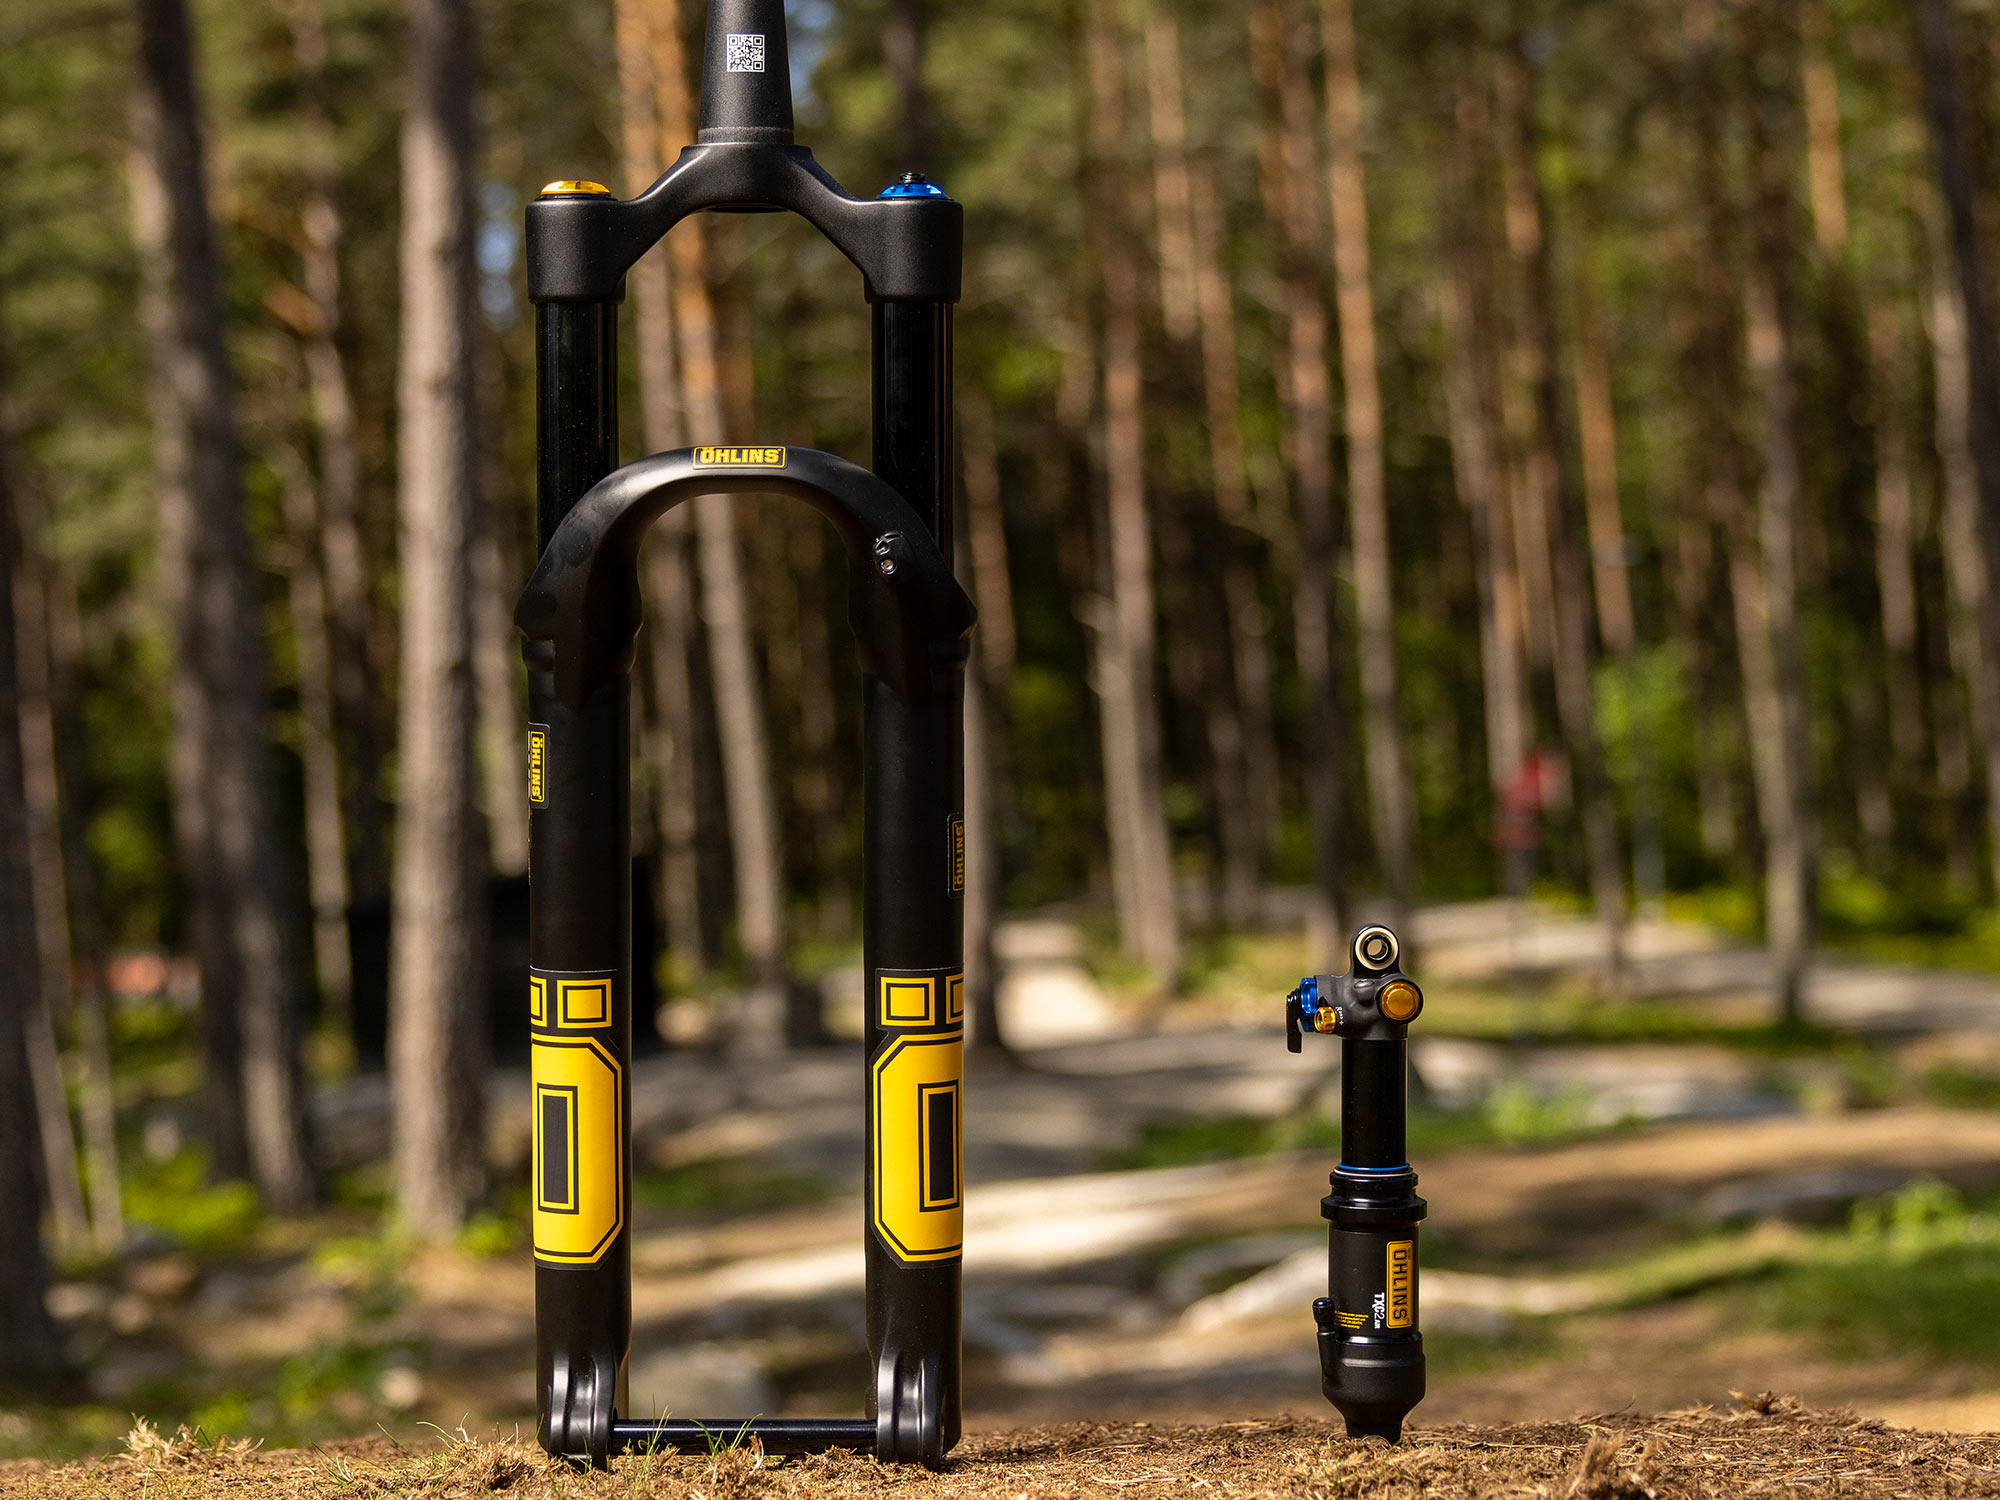 Öhlins XC short-travel 100-120mm cross-country mountain bike racing suspension, photo by Jeff Thoren, front & rear